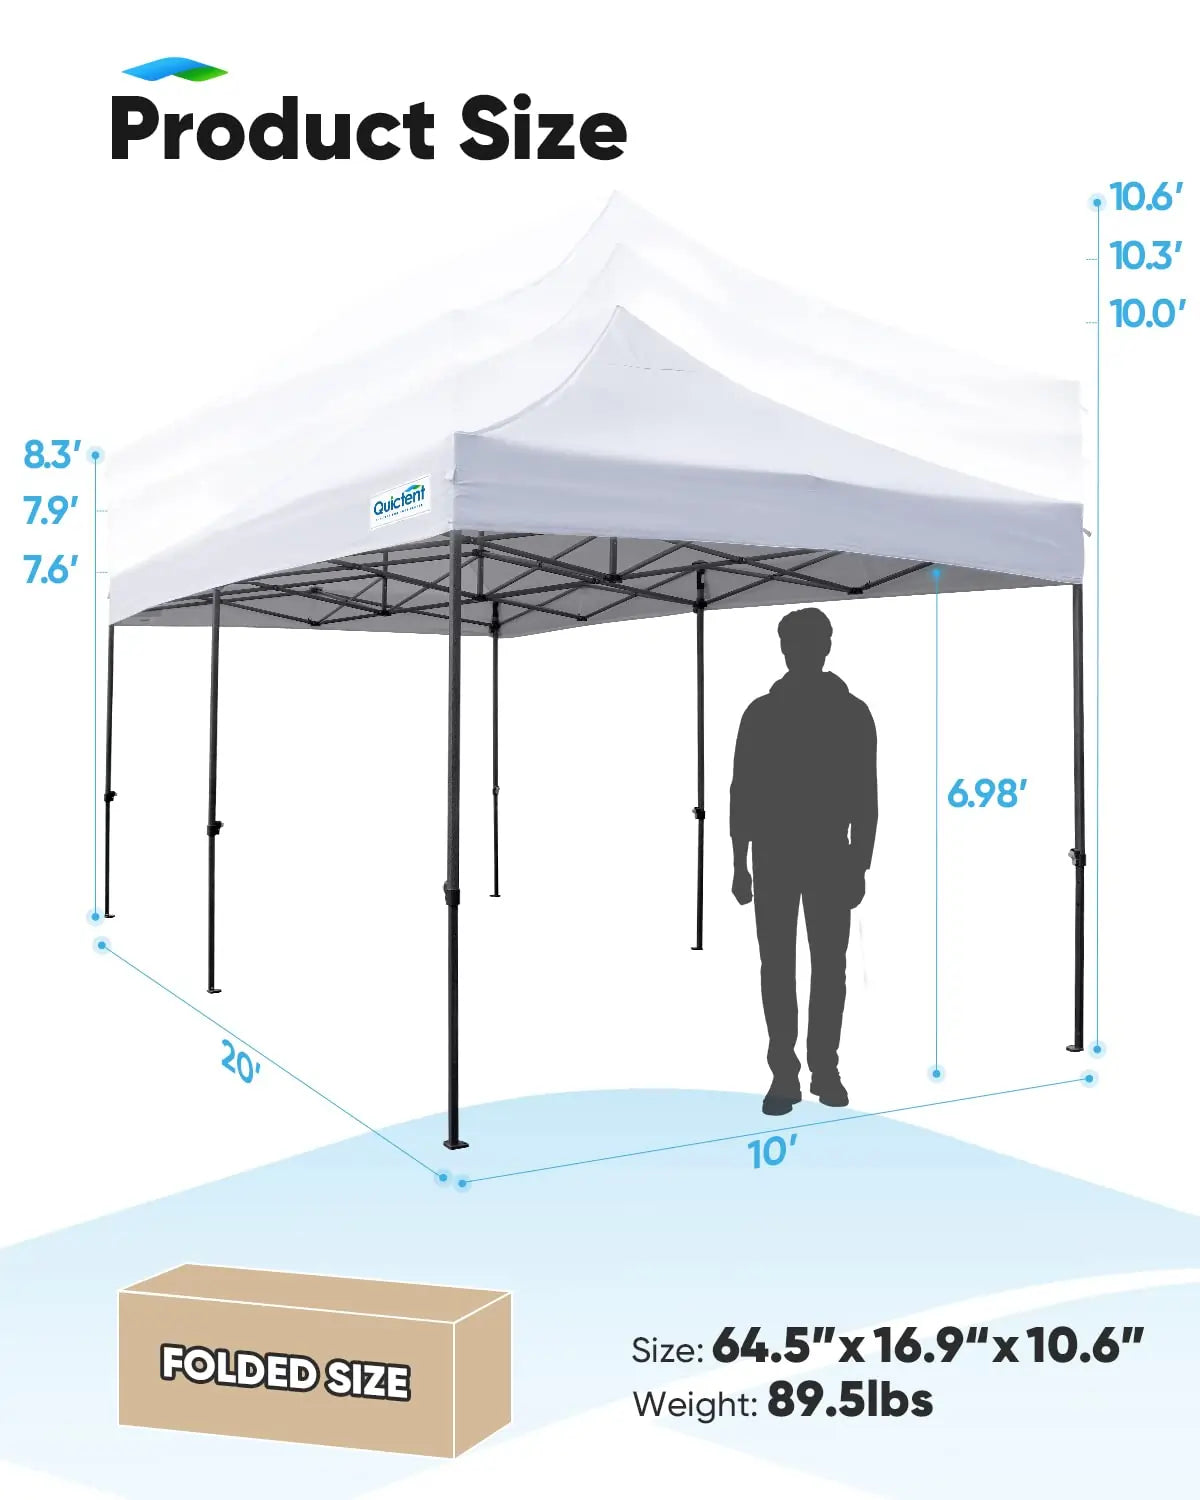 10x20 canopy tent size